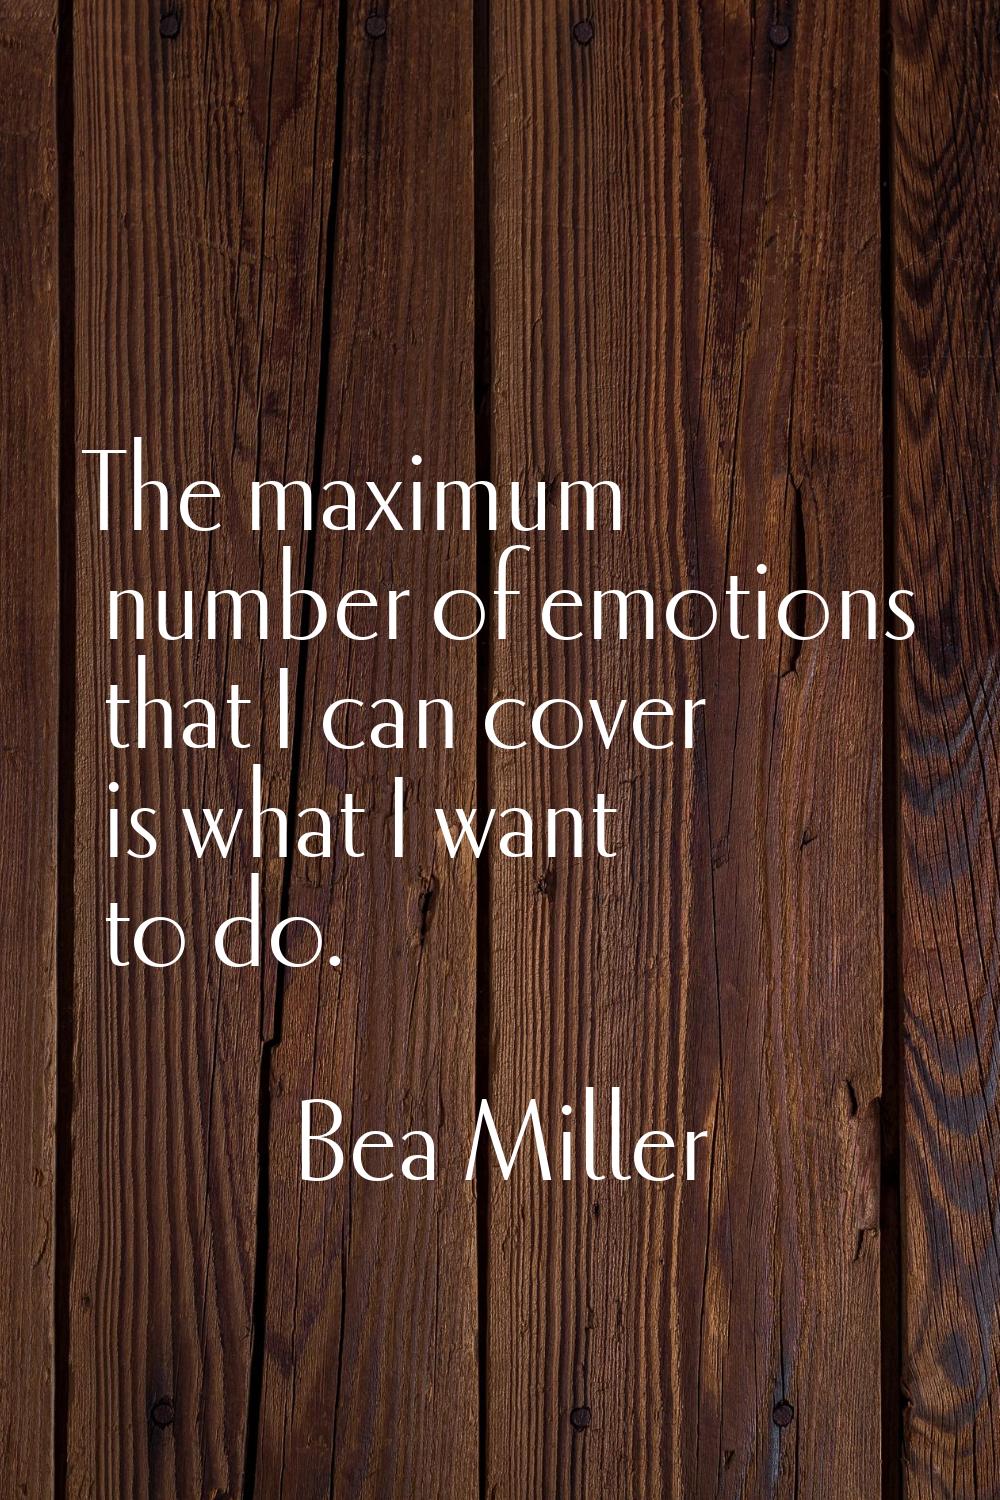 The maximum number of emotions that I can cover is what I want to do.